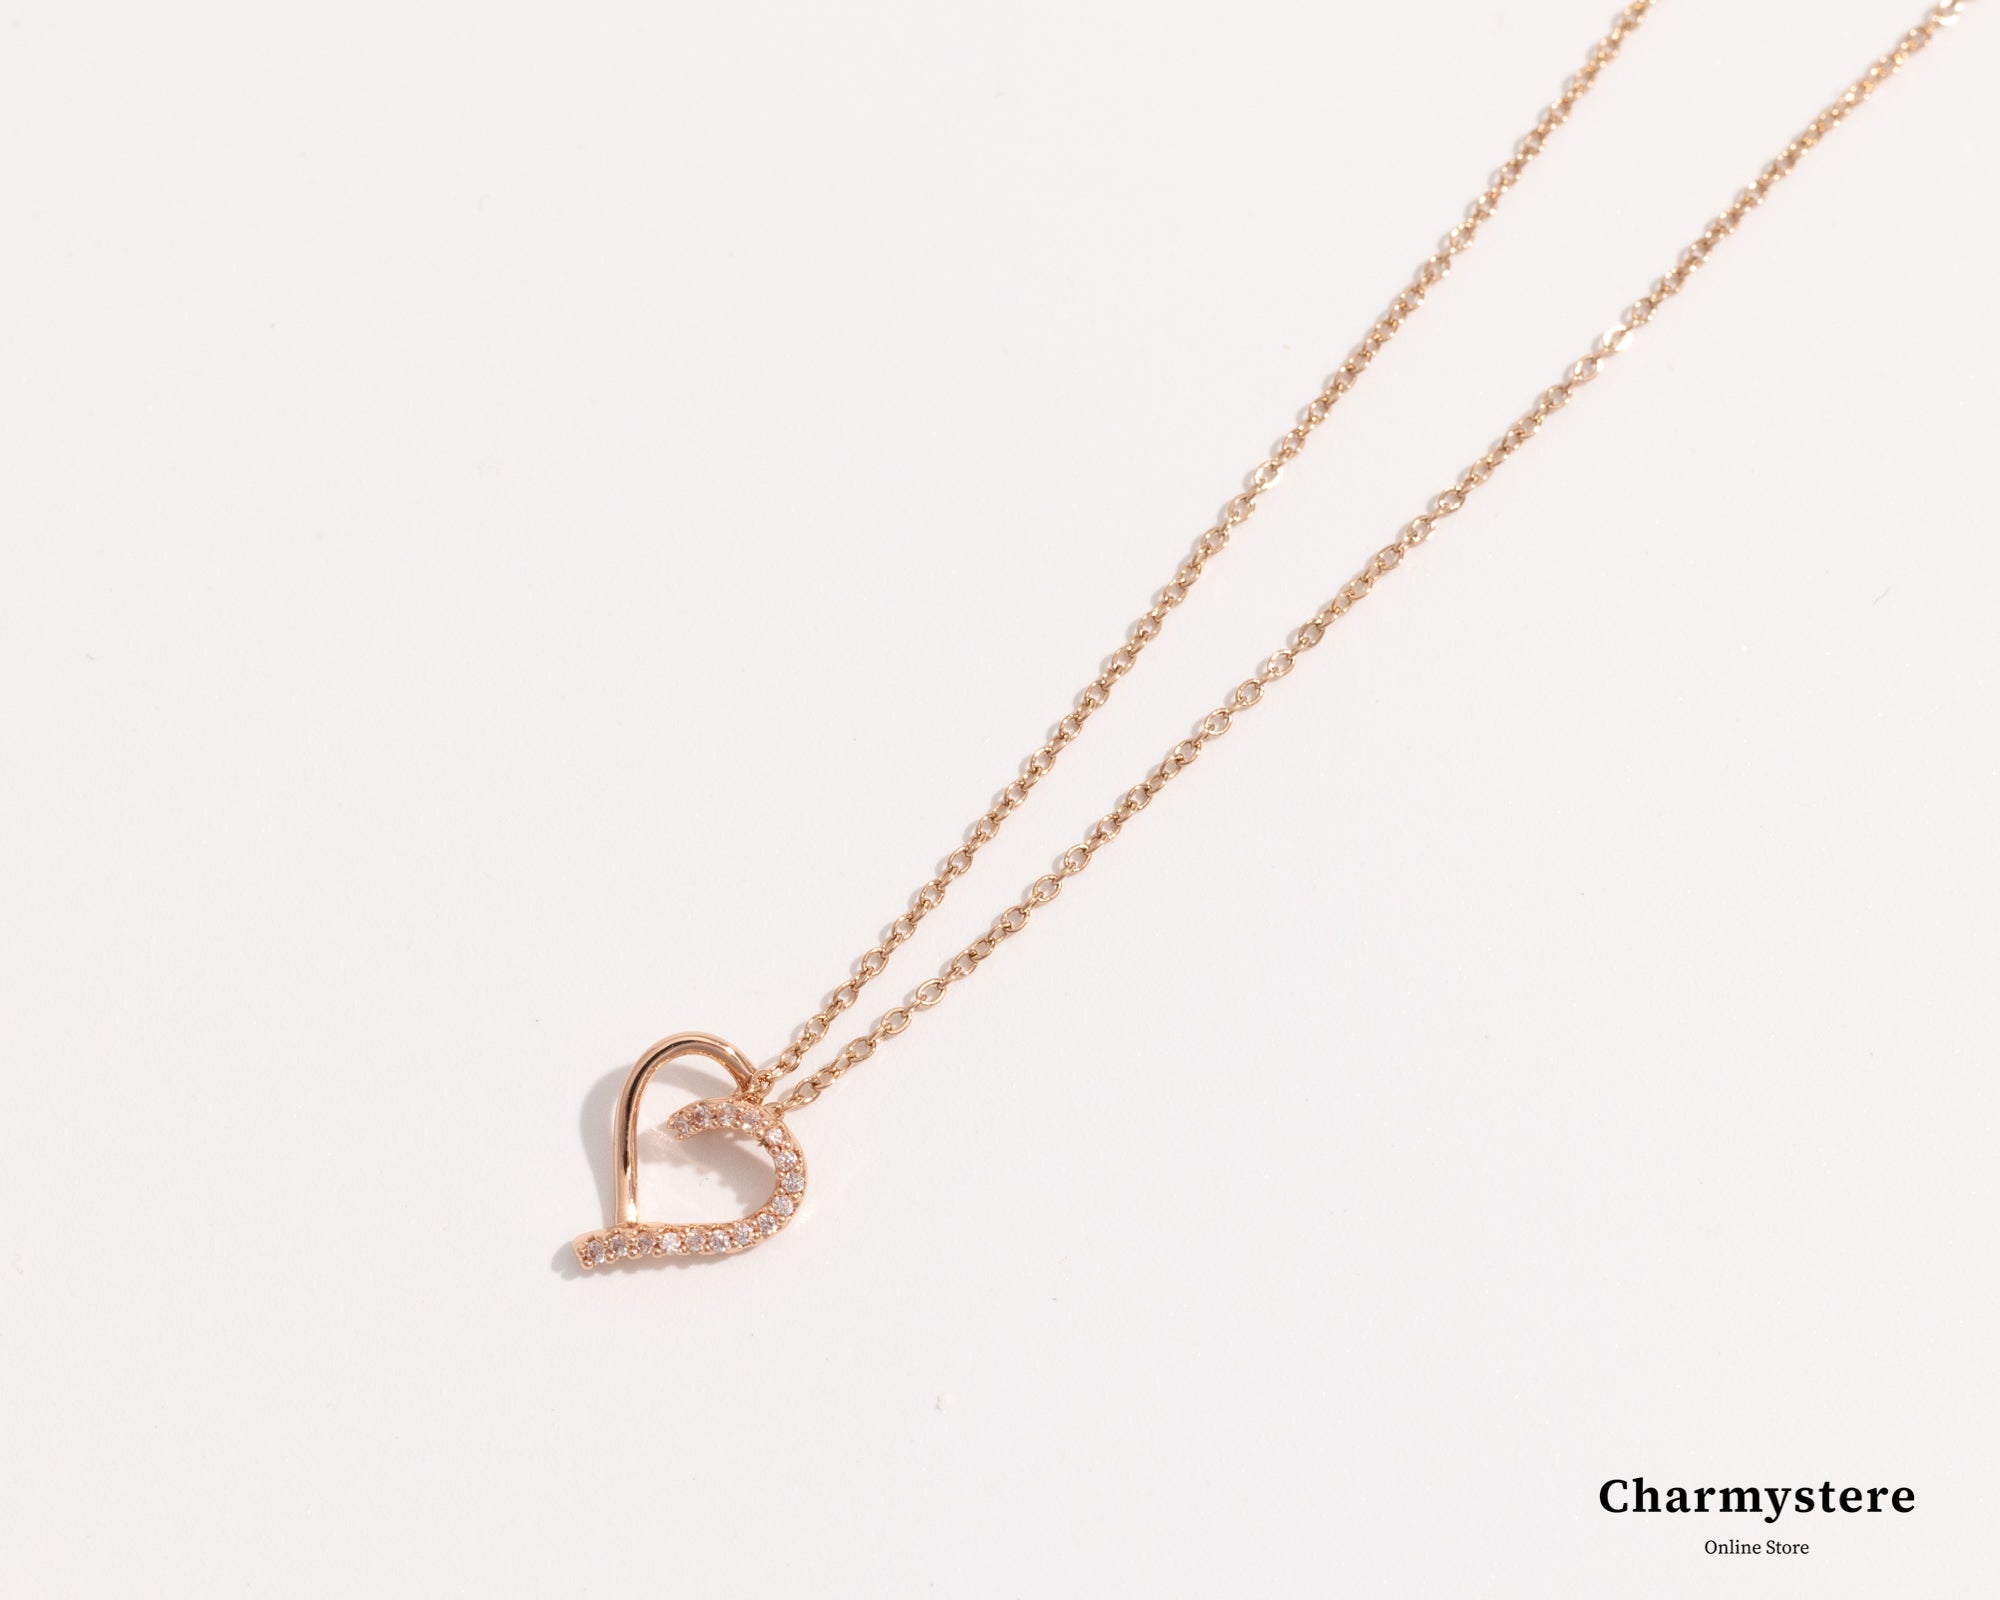 thinline heart necklace